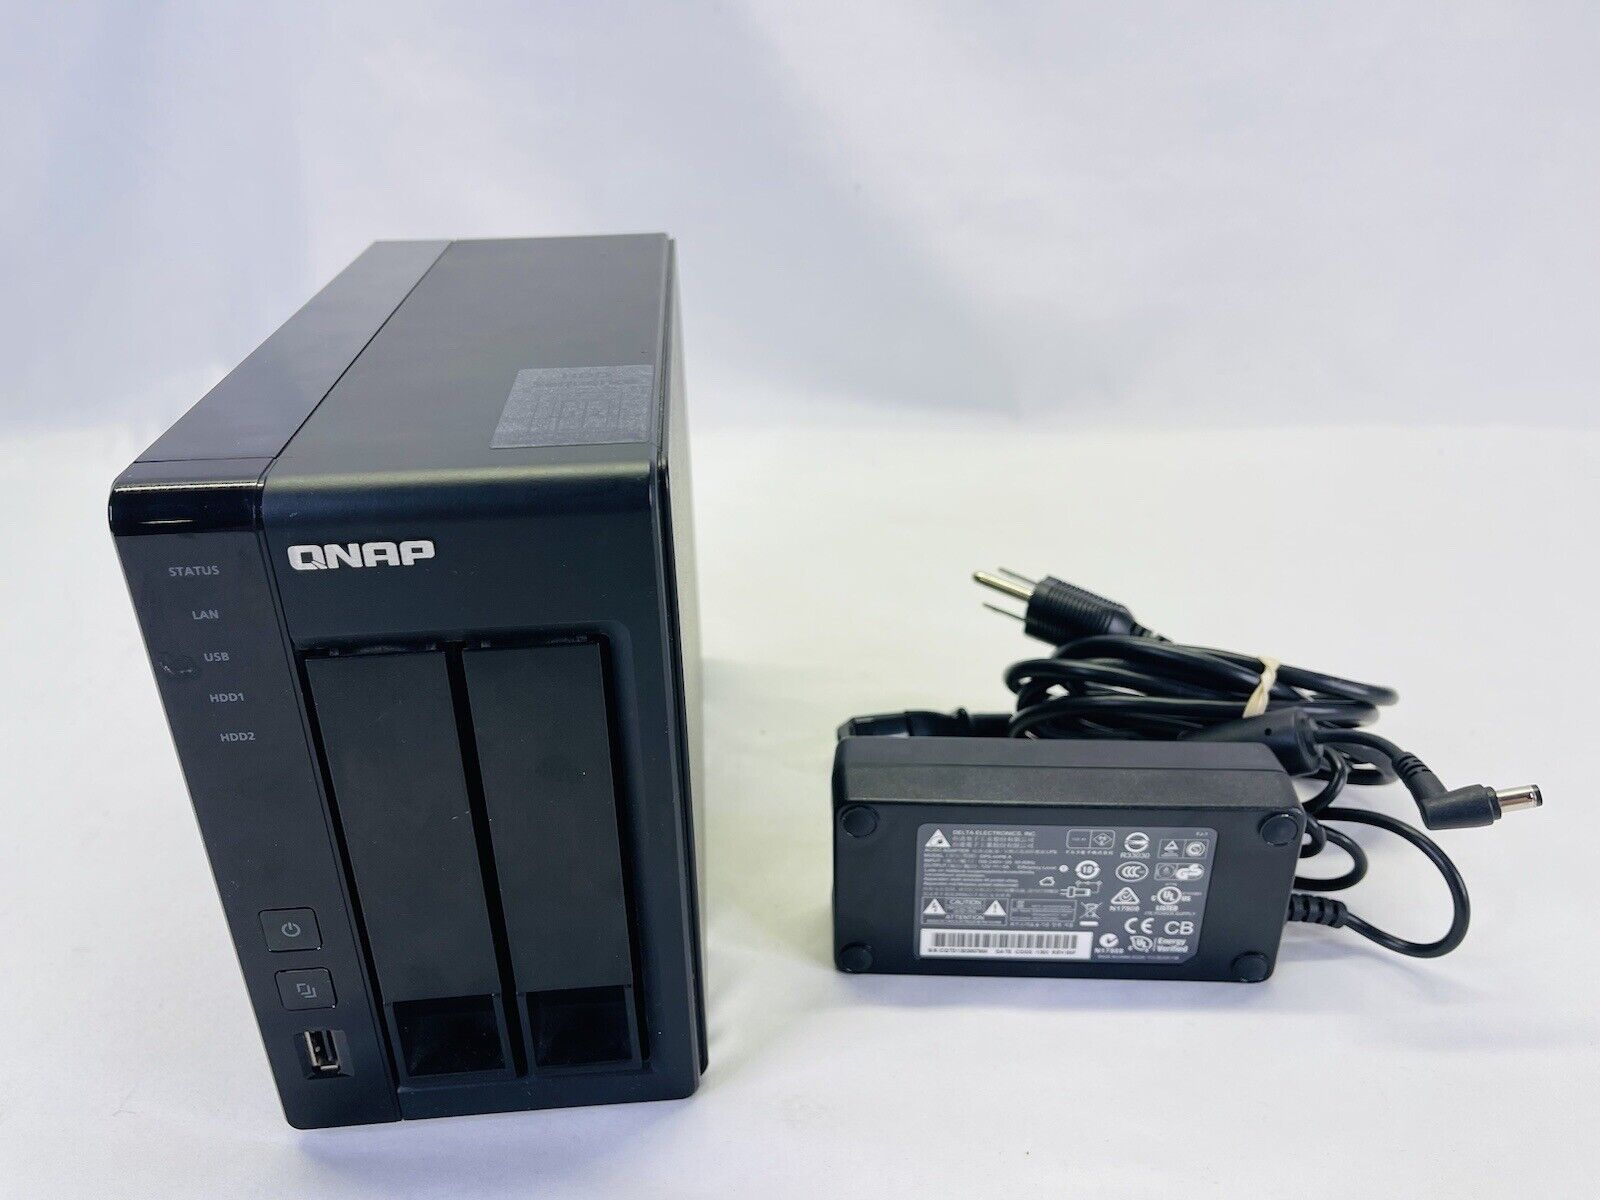 QNAP TS-219P II NAS Network Attached Storage 2x 2TB Seagate Drives W/ Power Cord